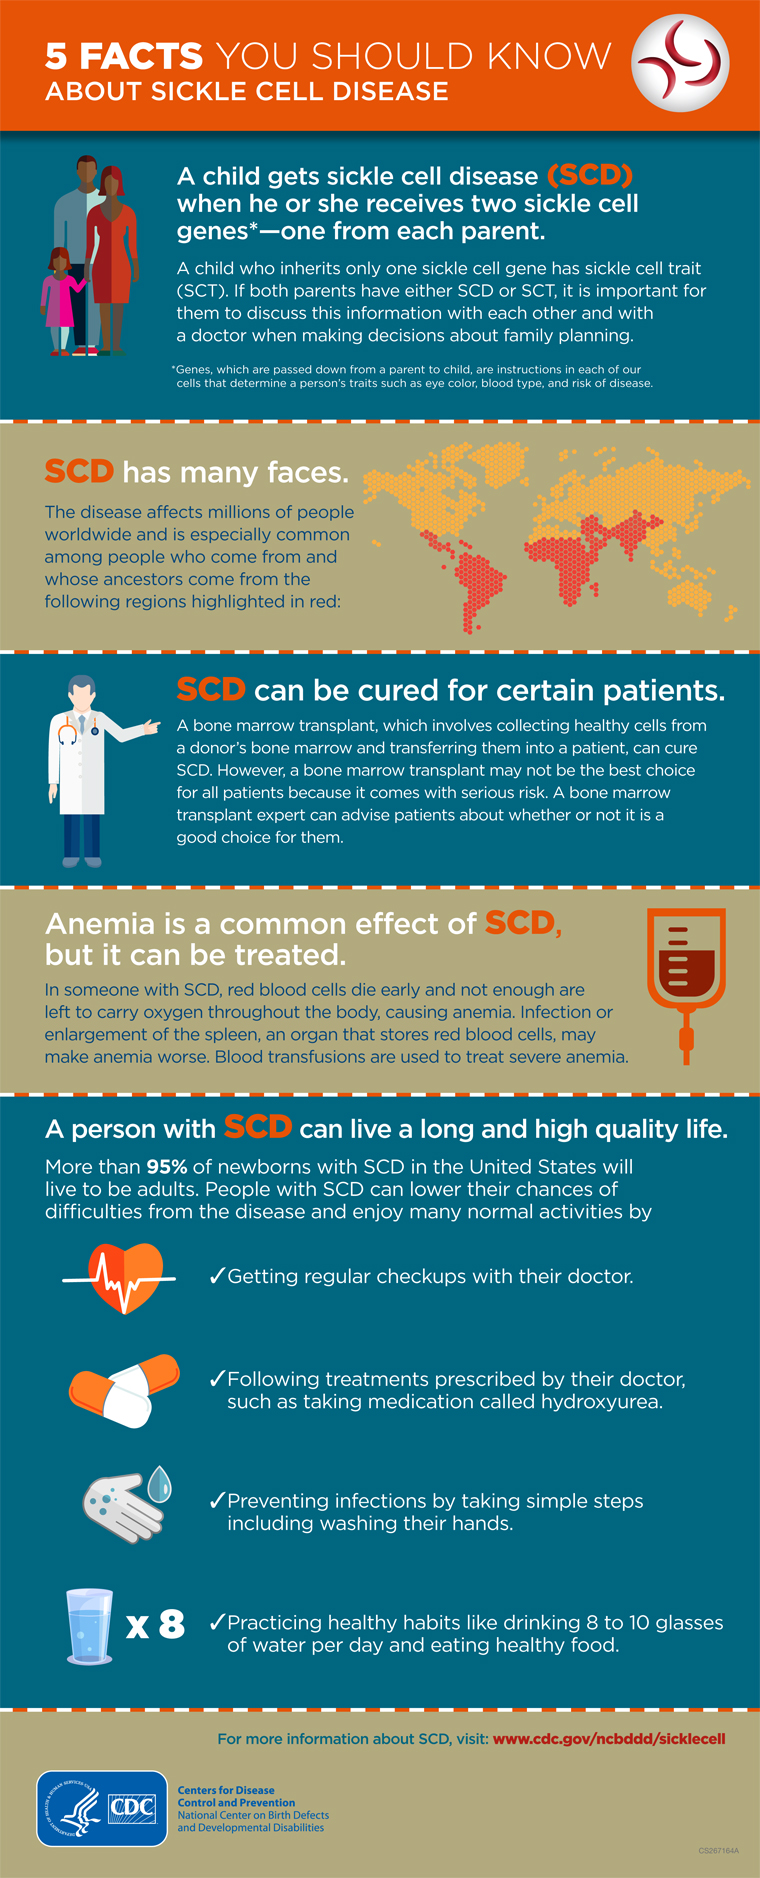 5 SCD Facts